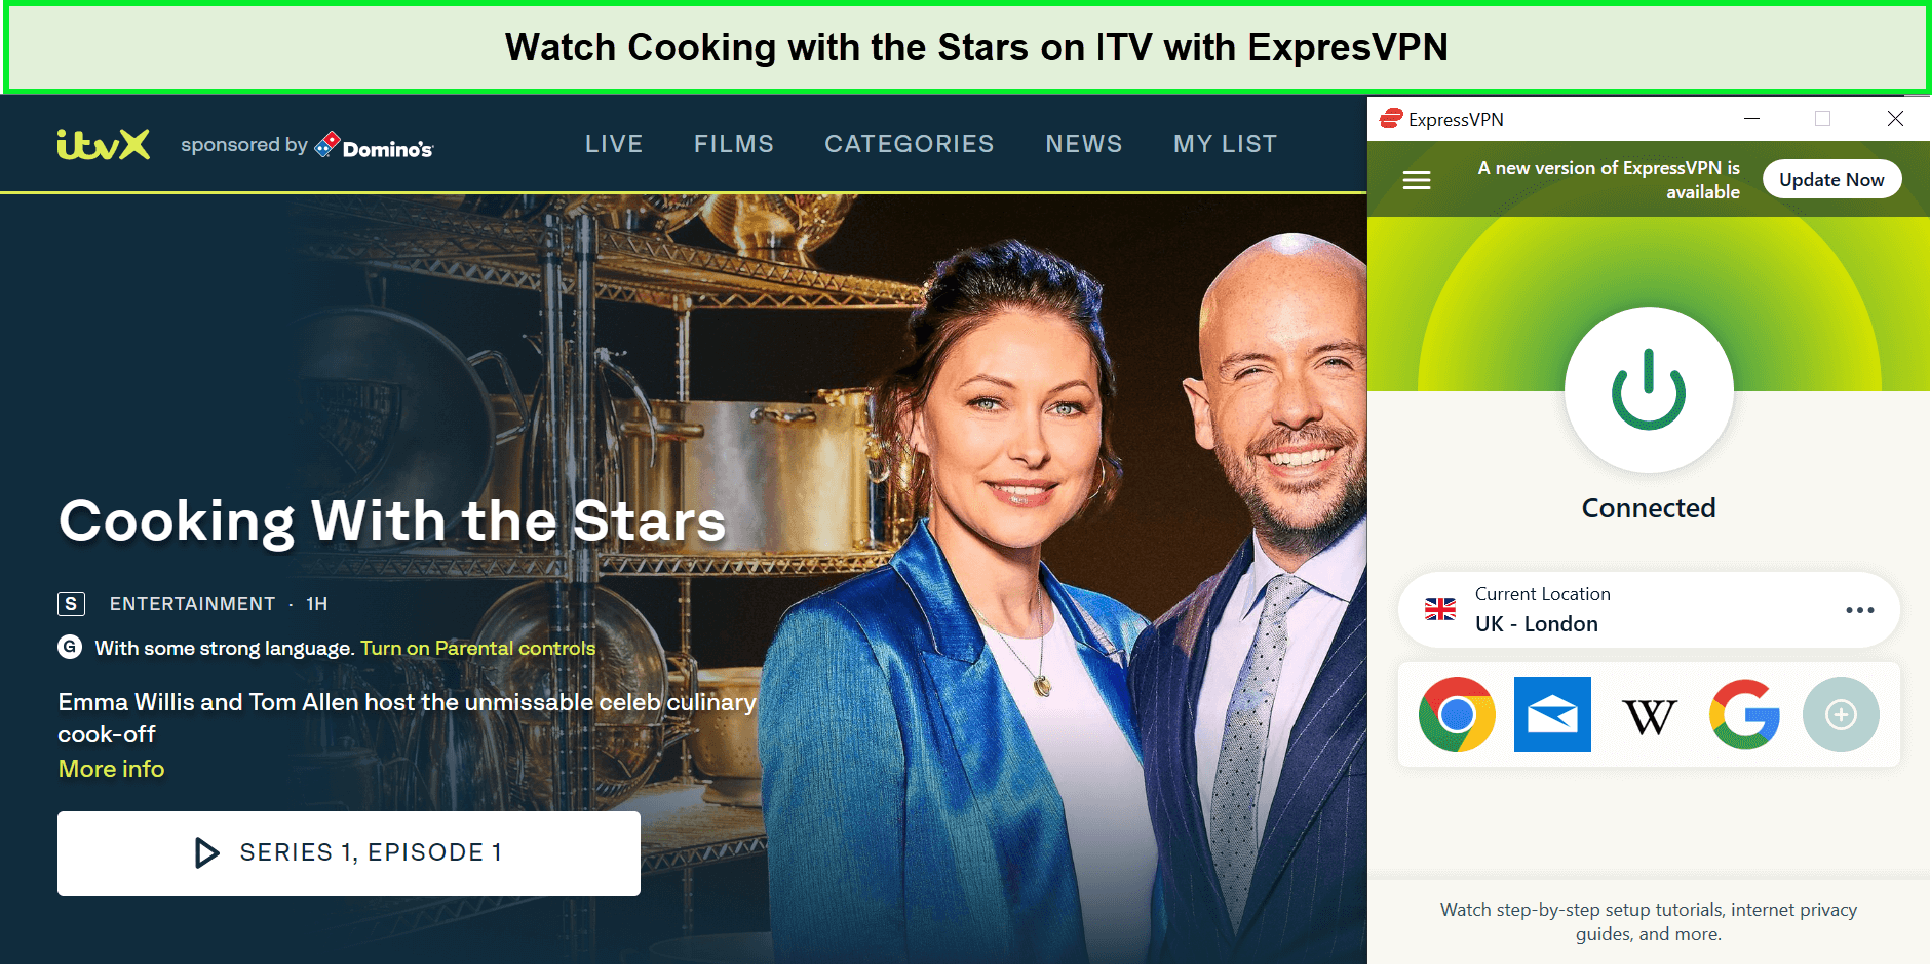 Watch-Cooking-with-the-Stars-Season-3-in-South Korea-on-ITV-with-ExpresVPN